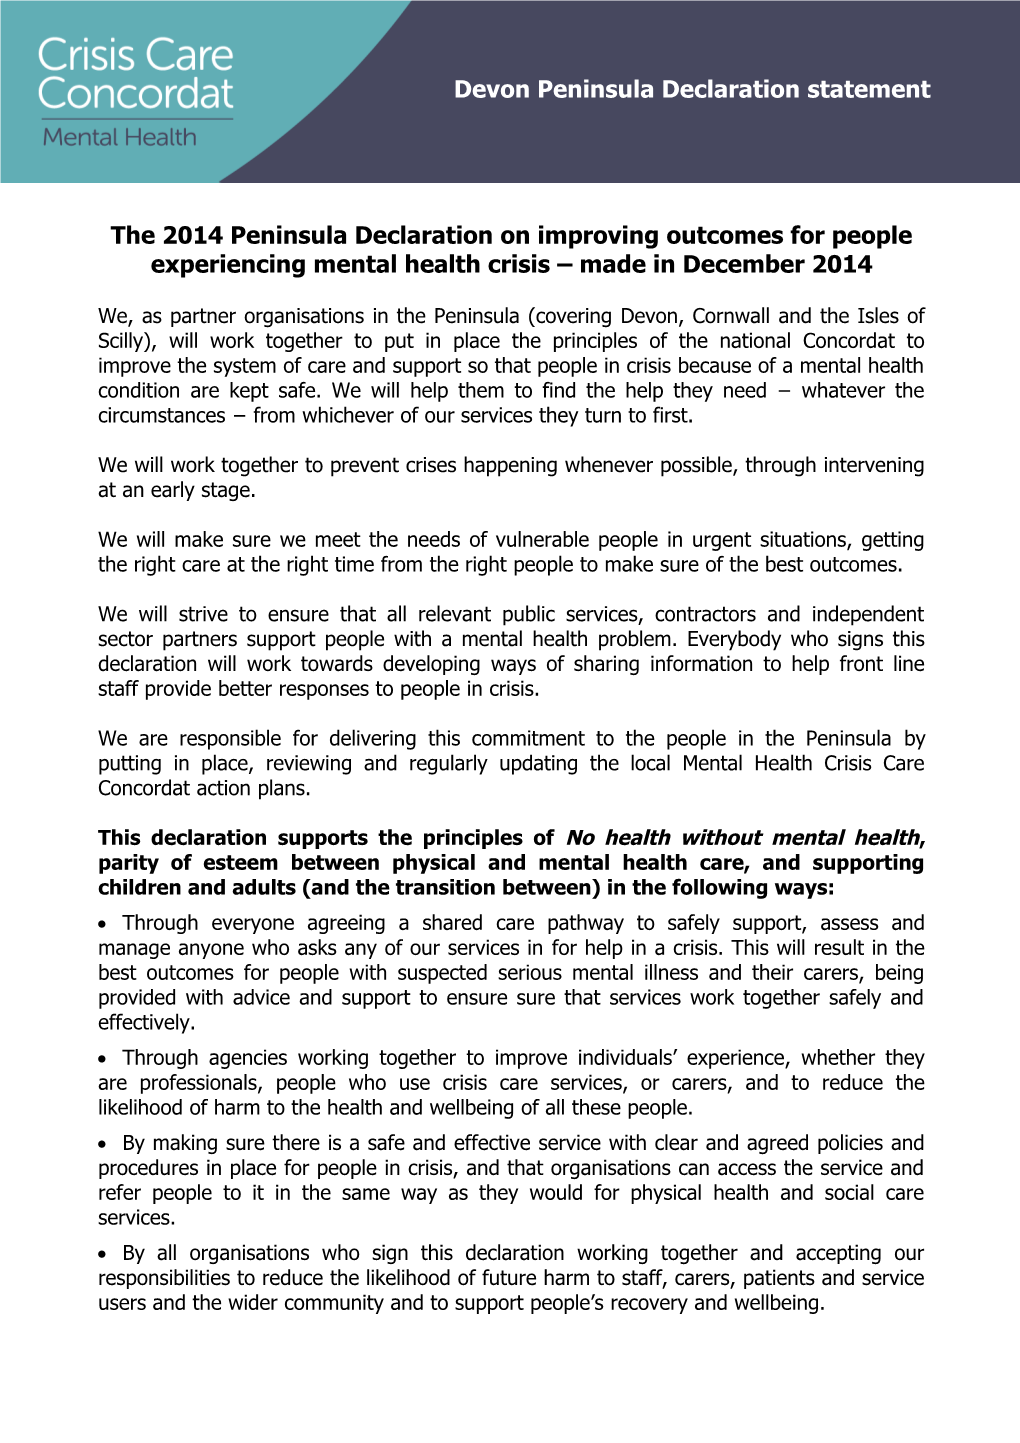 The 2014 Peninsula Declaration on Improving Outcomes for People Experiencing Mental Health